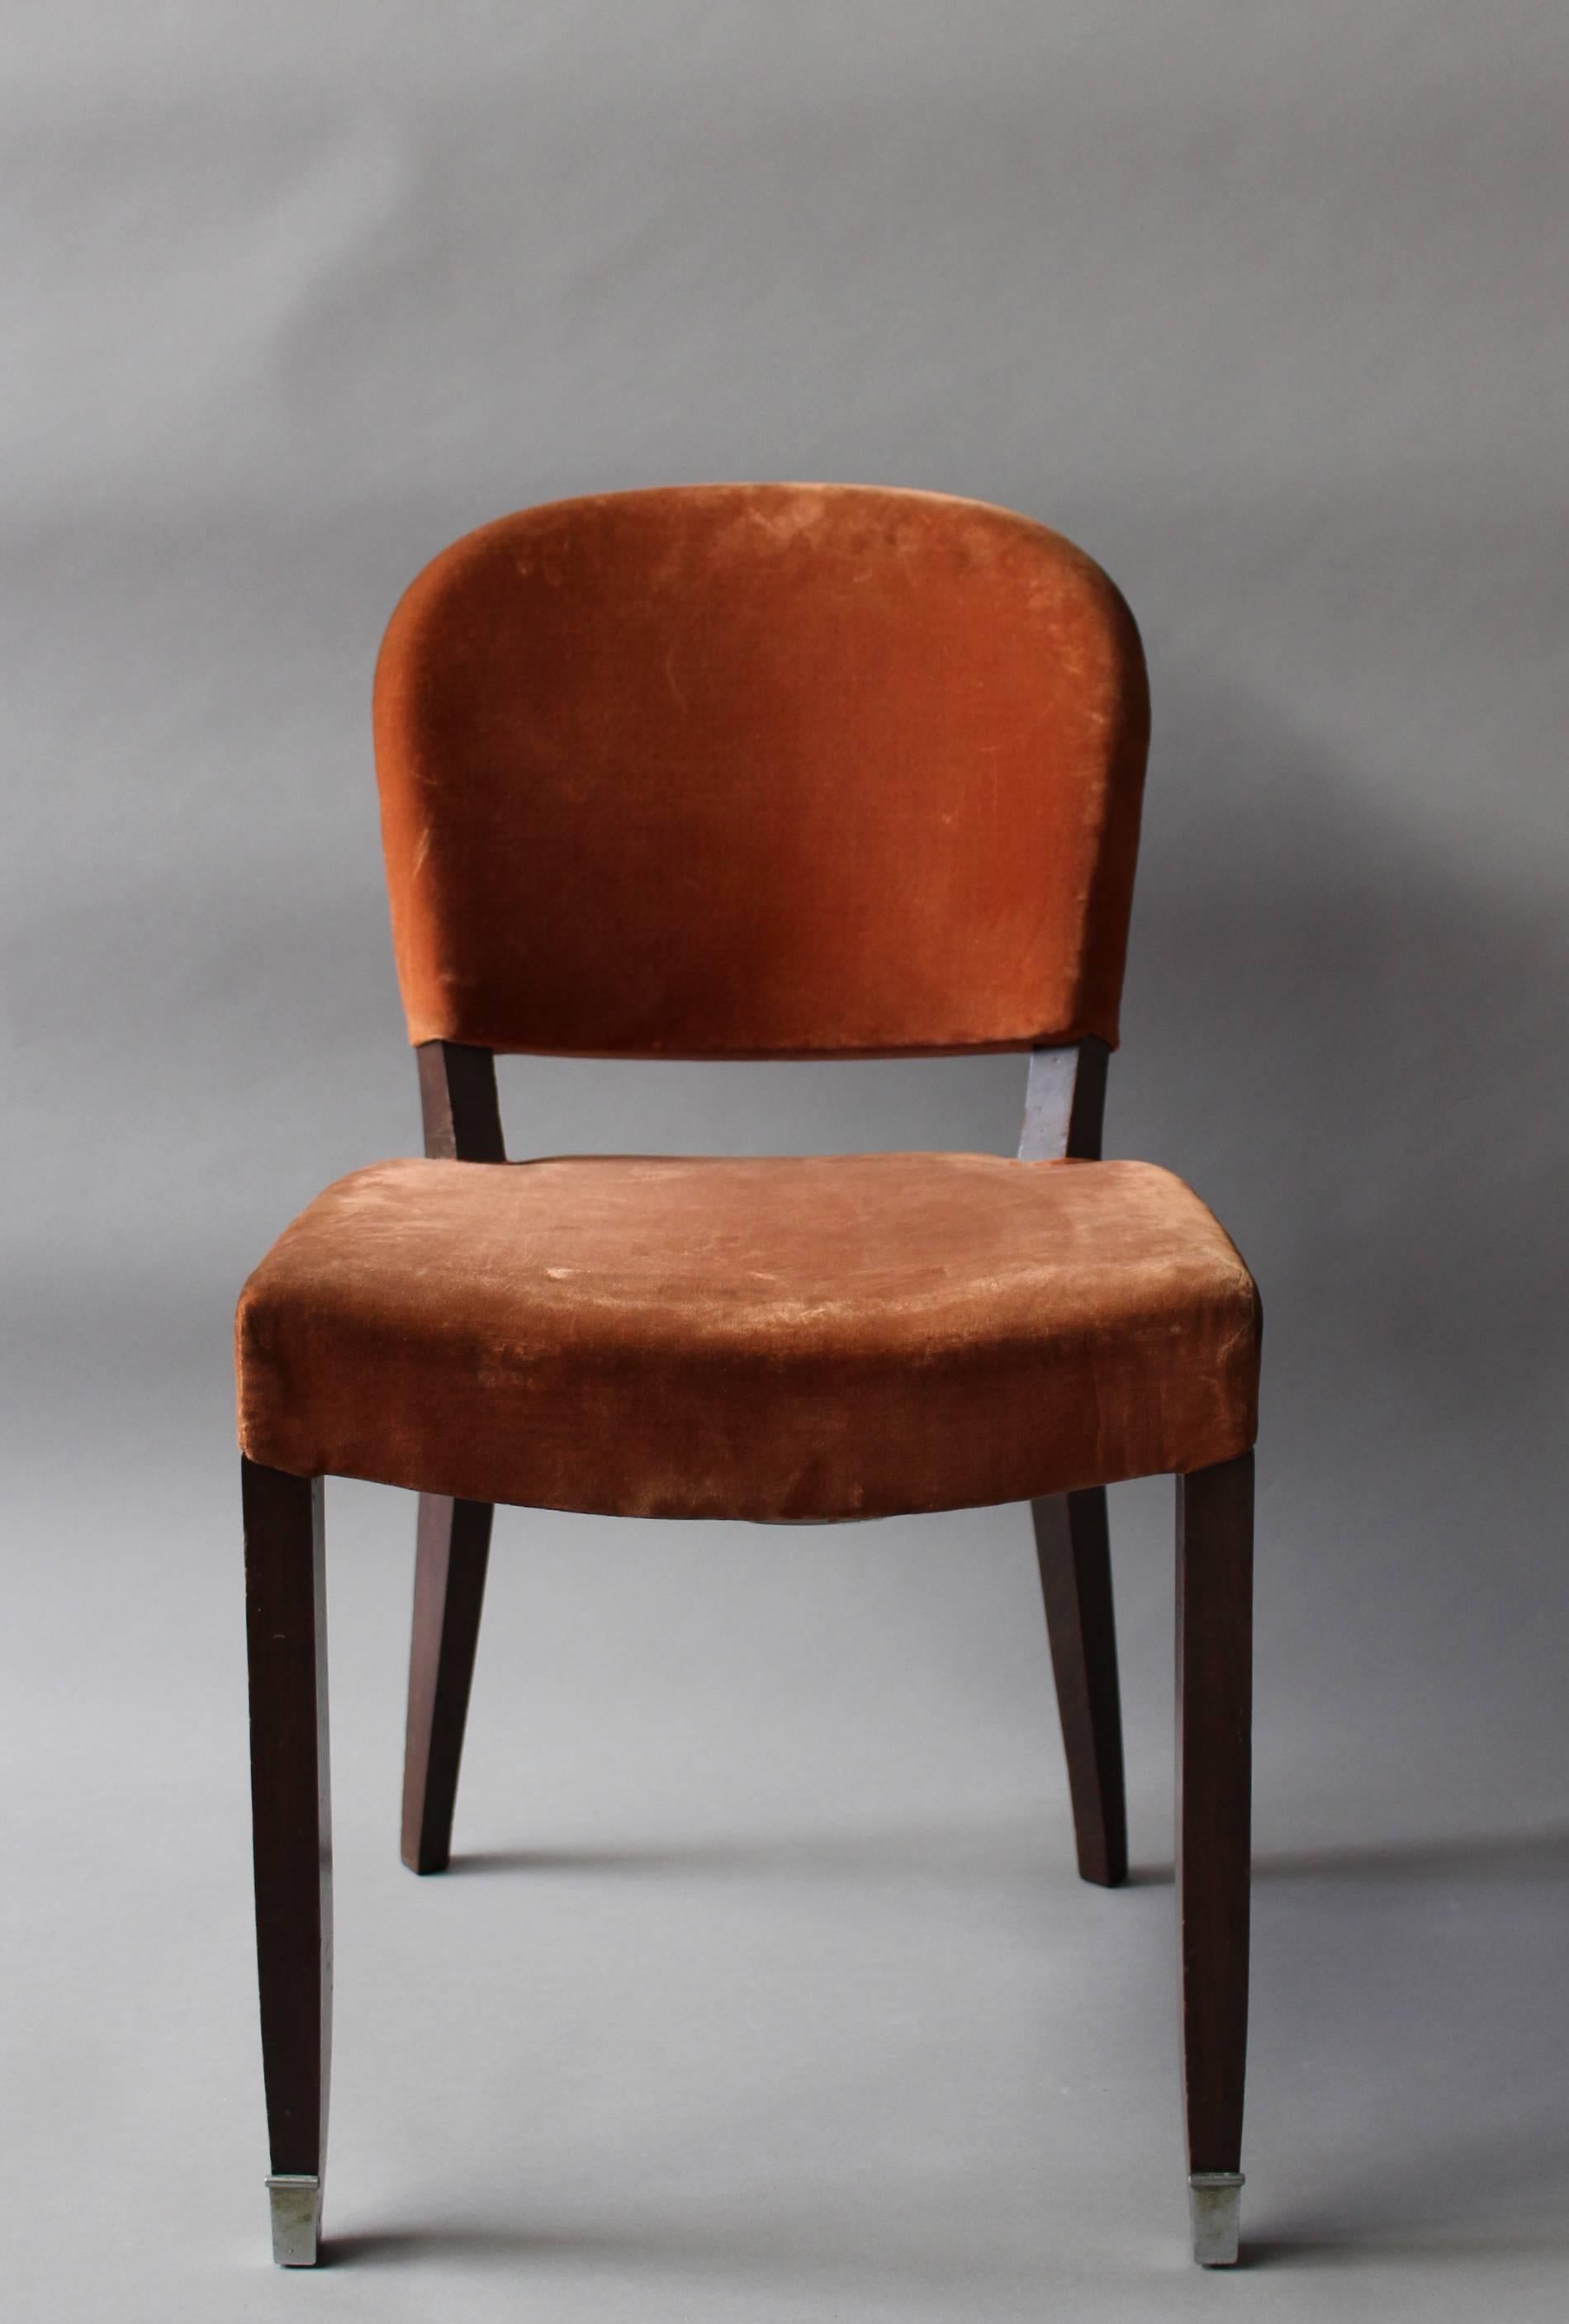 A fine French Art Deco chair by Jules Leleu with elegant sabots on front legs.